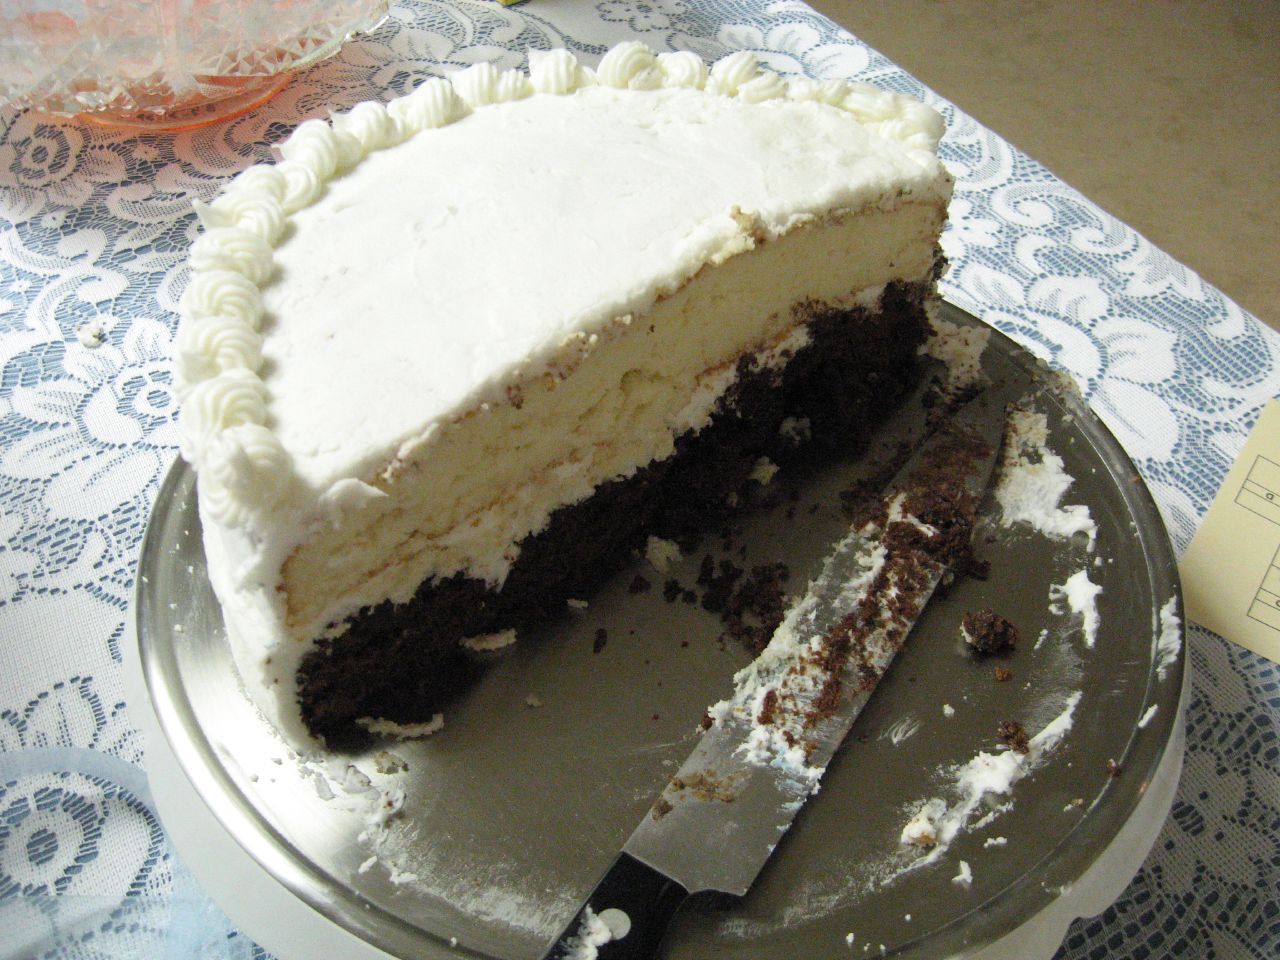 there is a large cake with white frosting on a plate